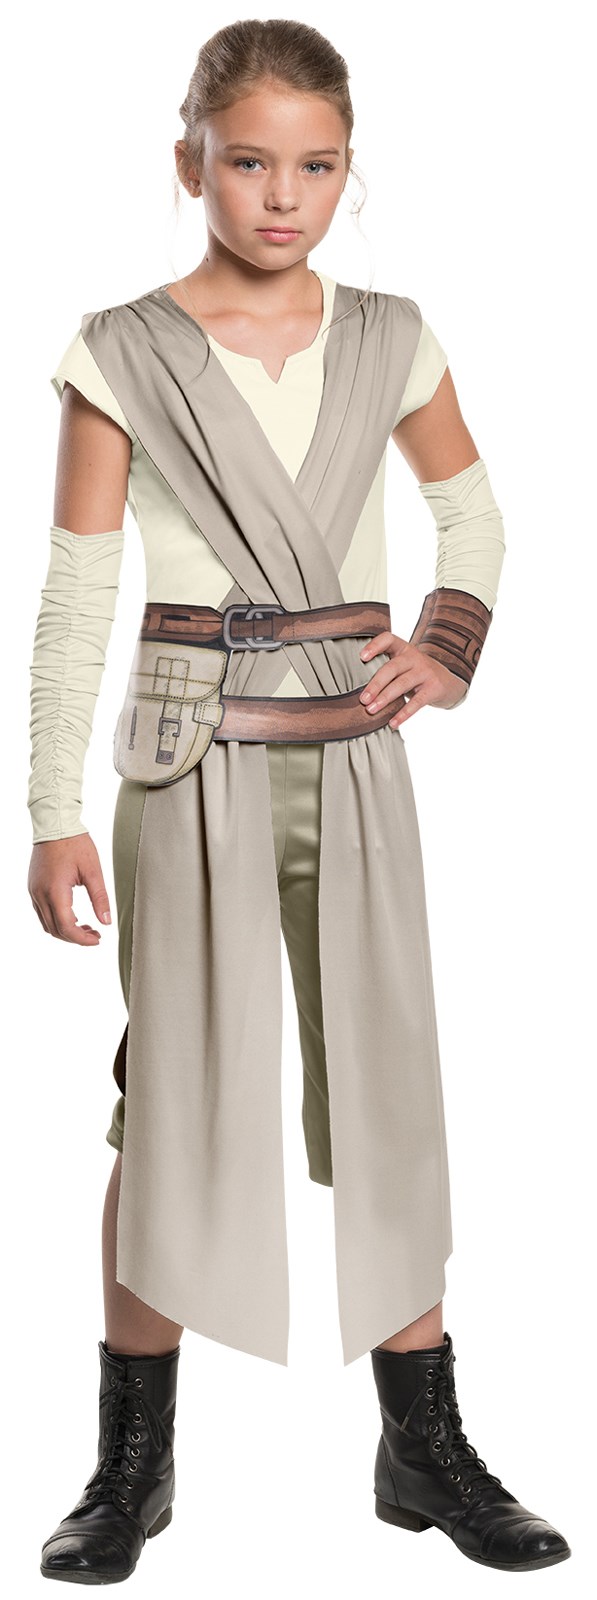 Star Wars:  The Force Awakens – Classic Rey Costume For Girls